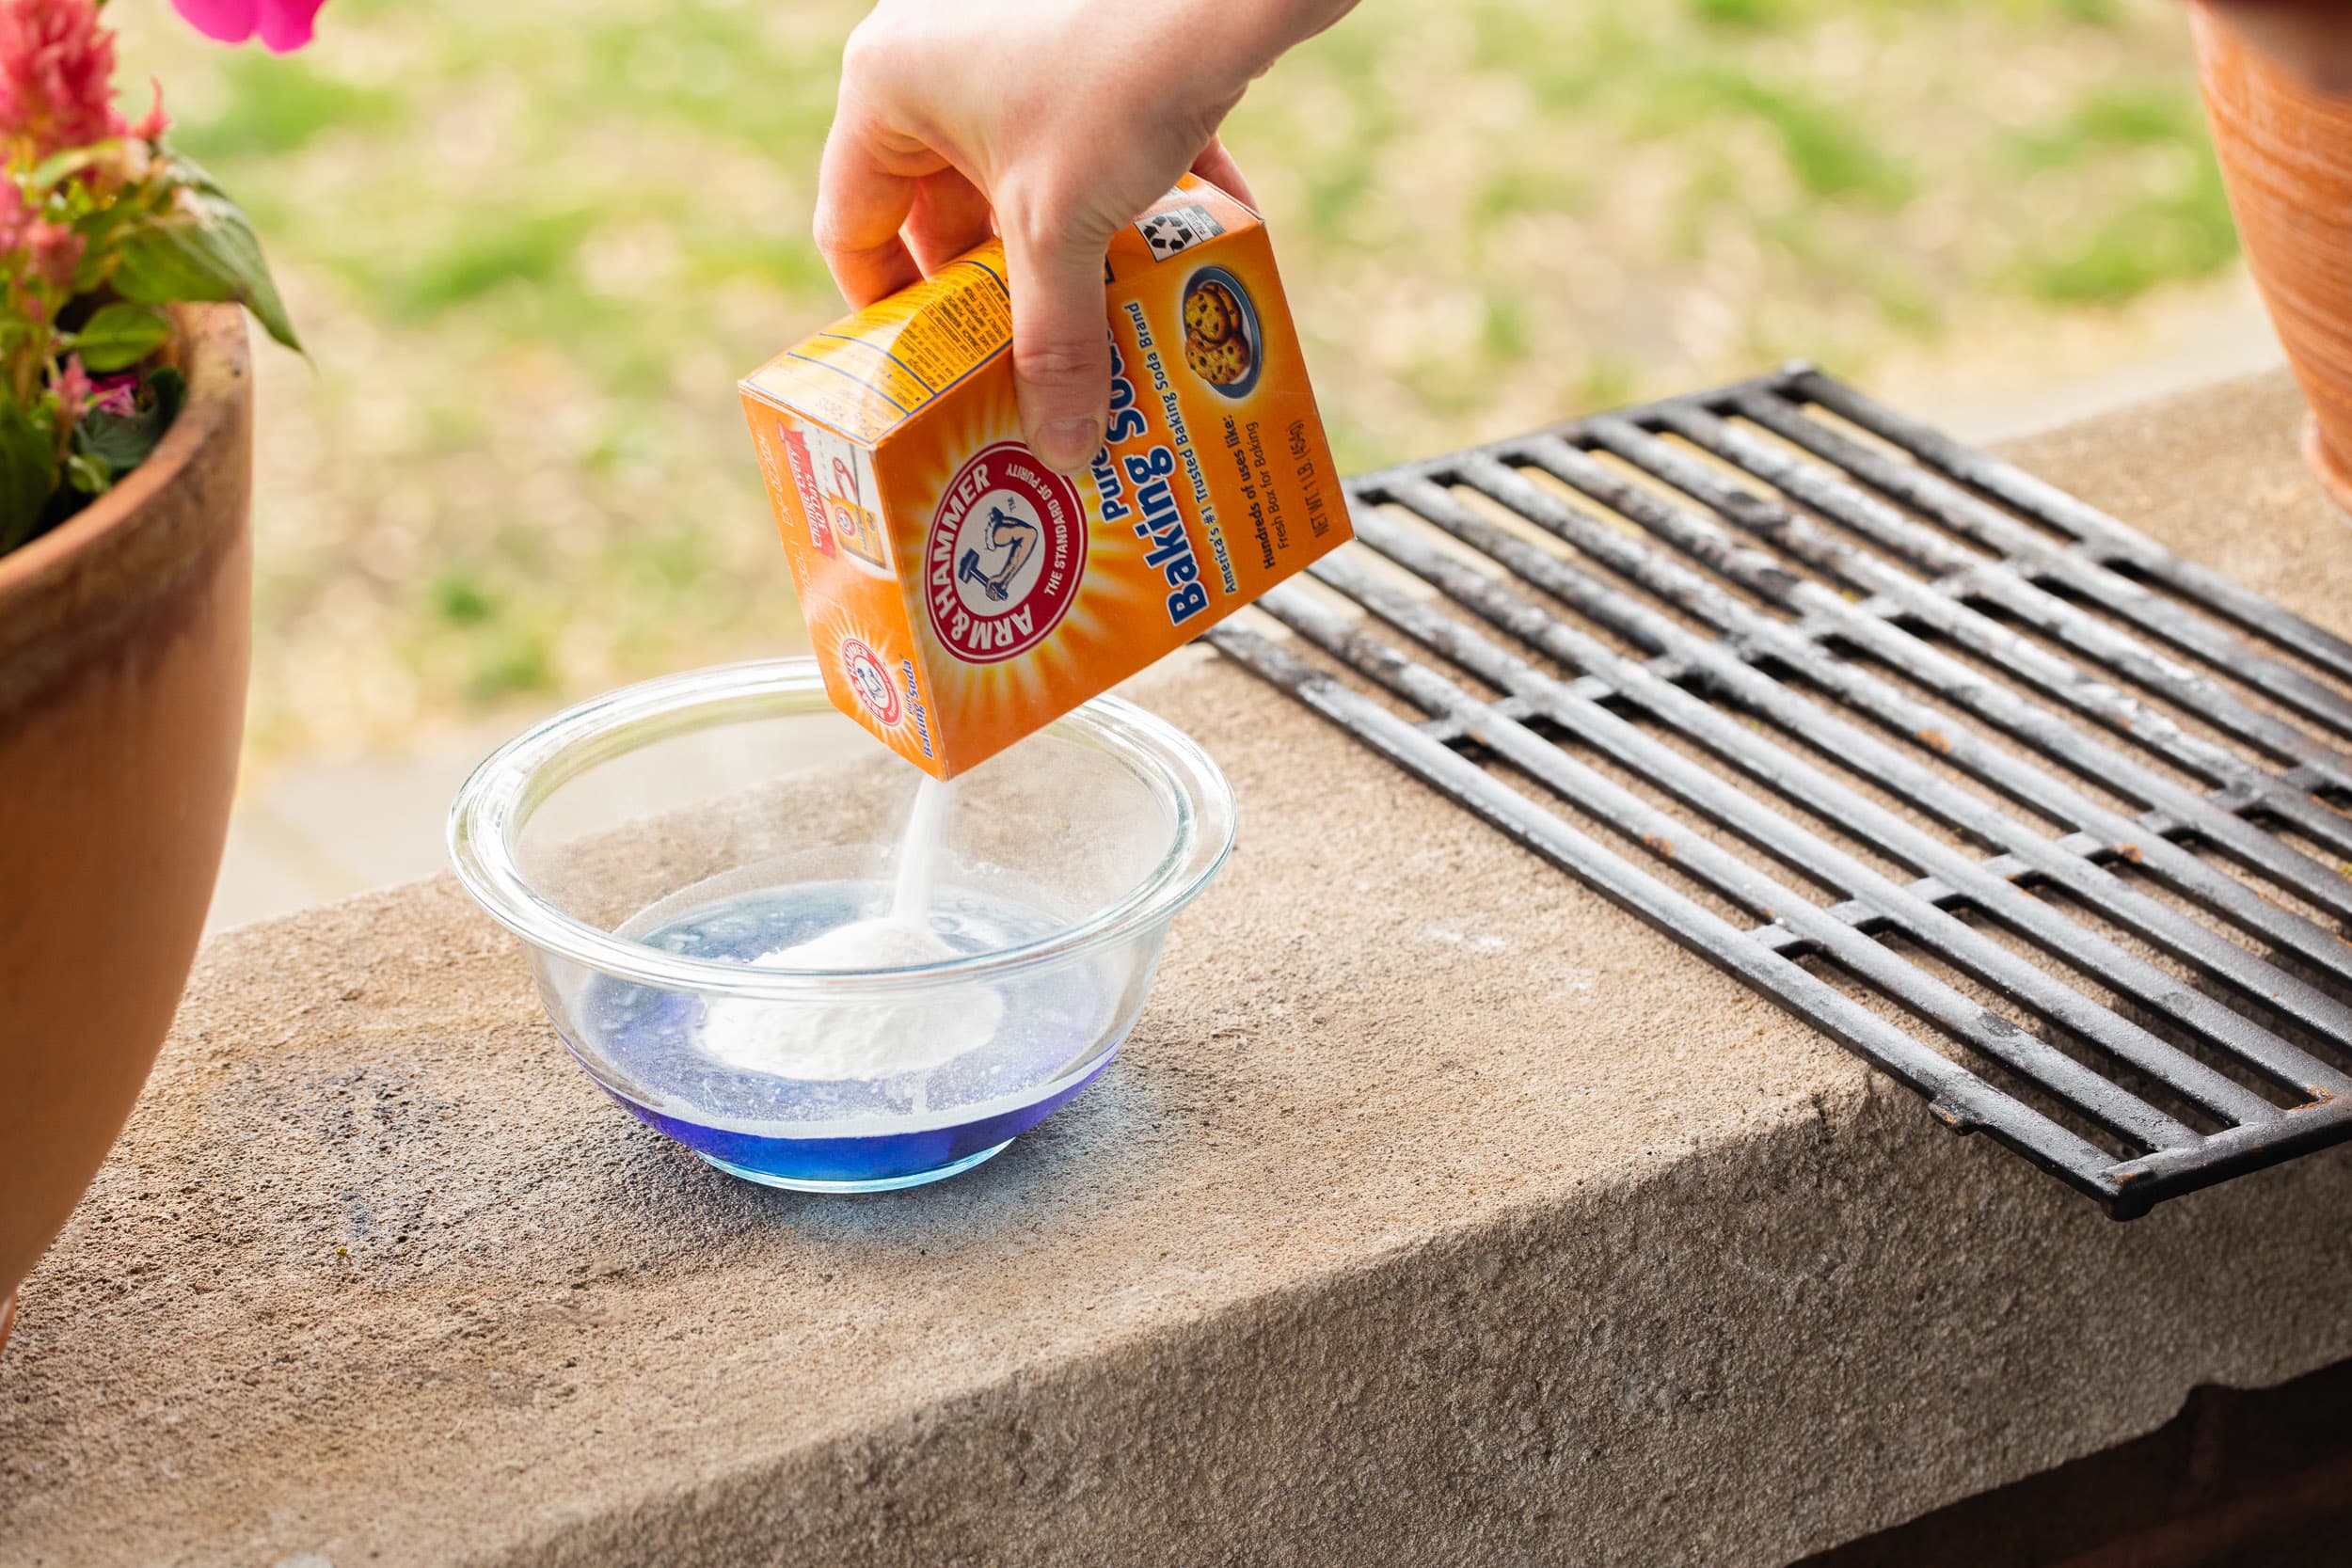 How to clean a grill: for maximum flavor and good hygiene